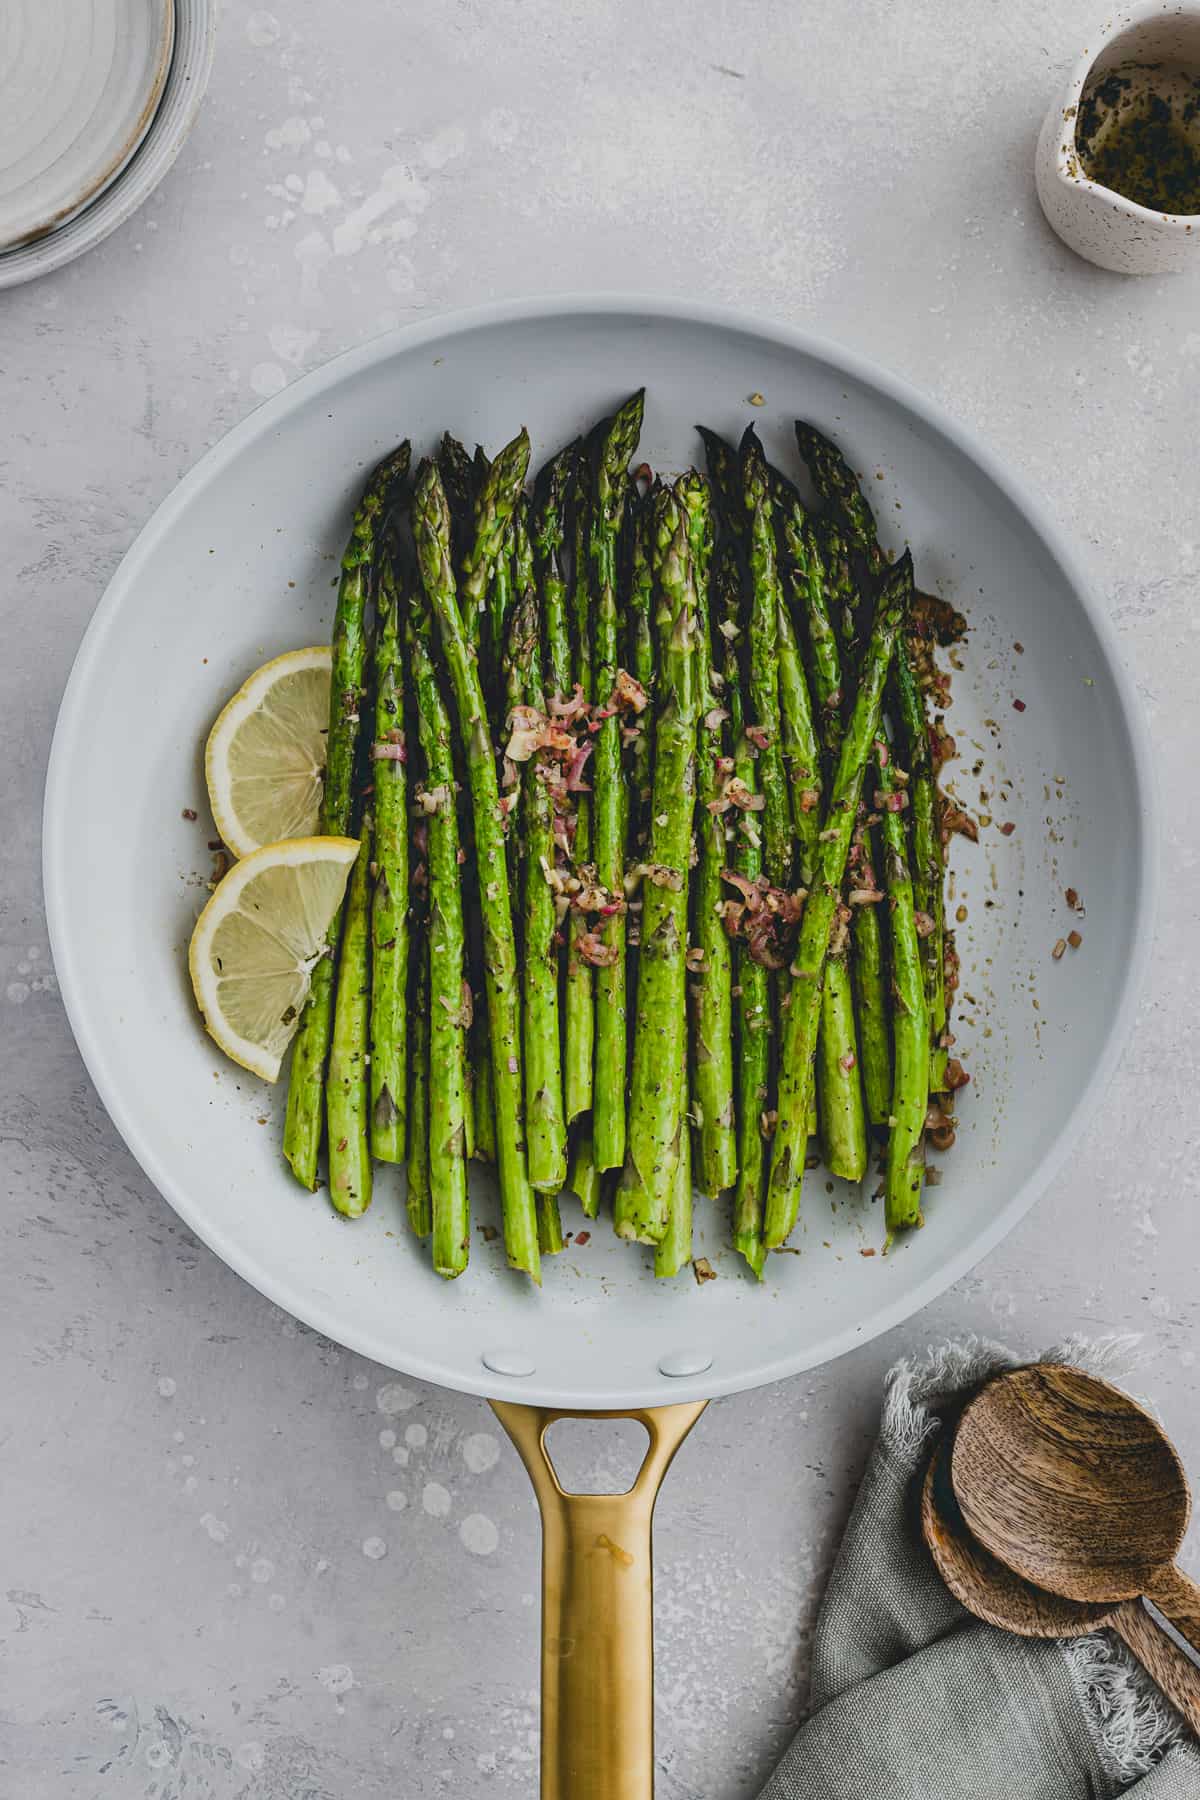 Pan Fried Asparagus with slices of lemon